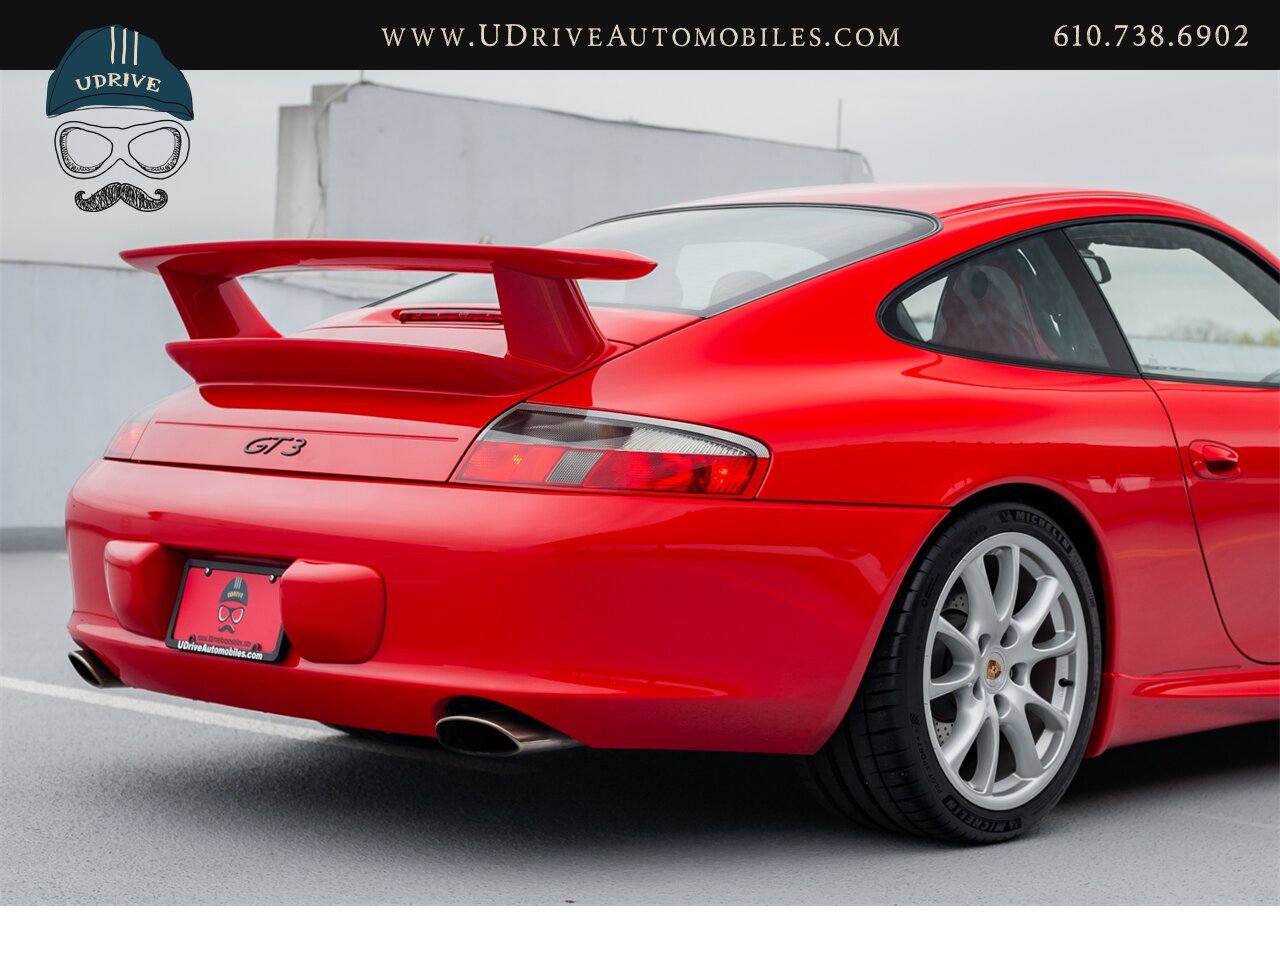 2004 Porsche 911 996 GT3 Guards Red Sport Seats Painted Hardbacks  Painted Center Console 18k Miles - Photo 21 - West Chester, PA 19382